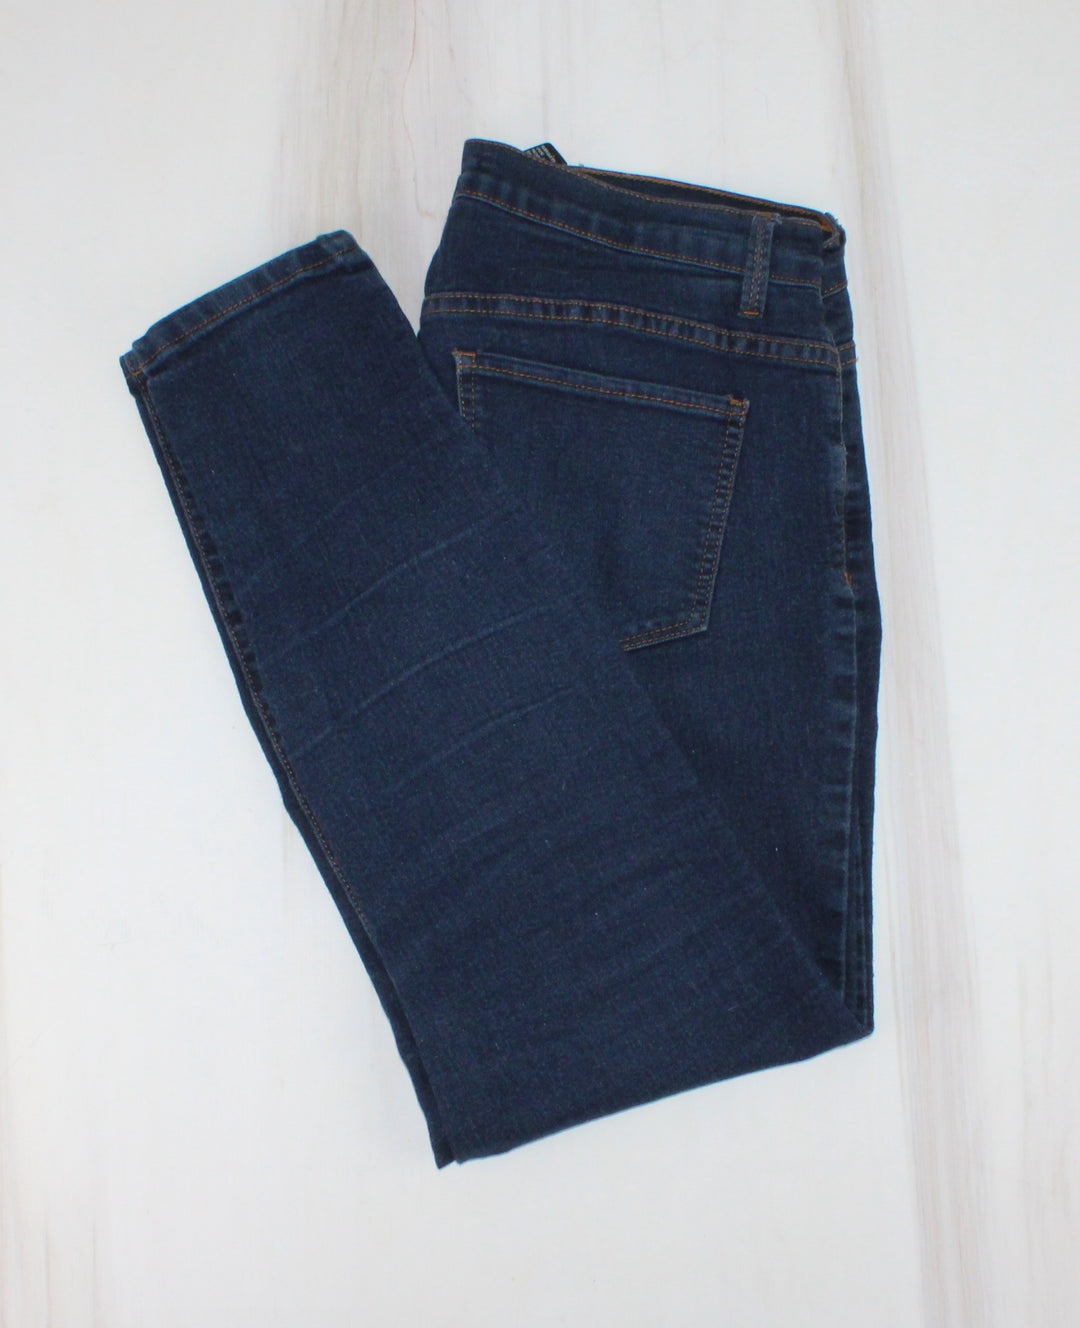 FOREVER 21 JEANS SIZE 30 EUC